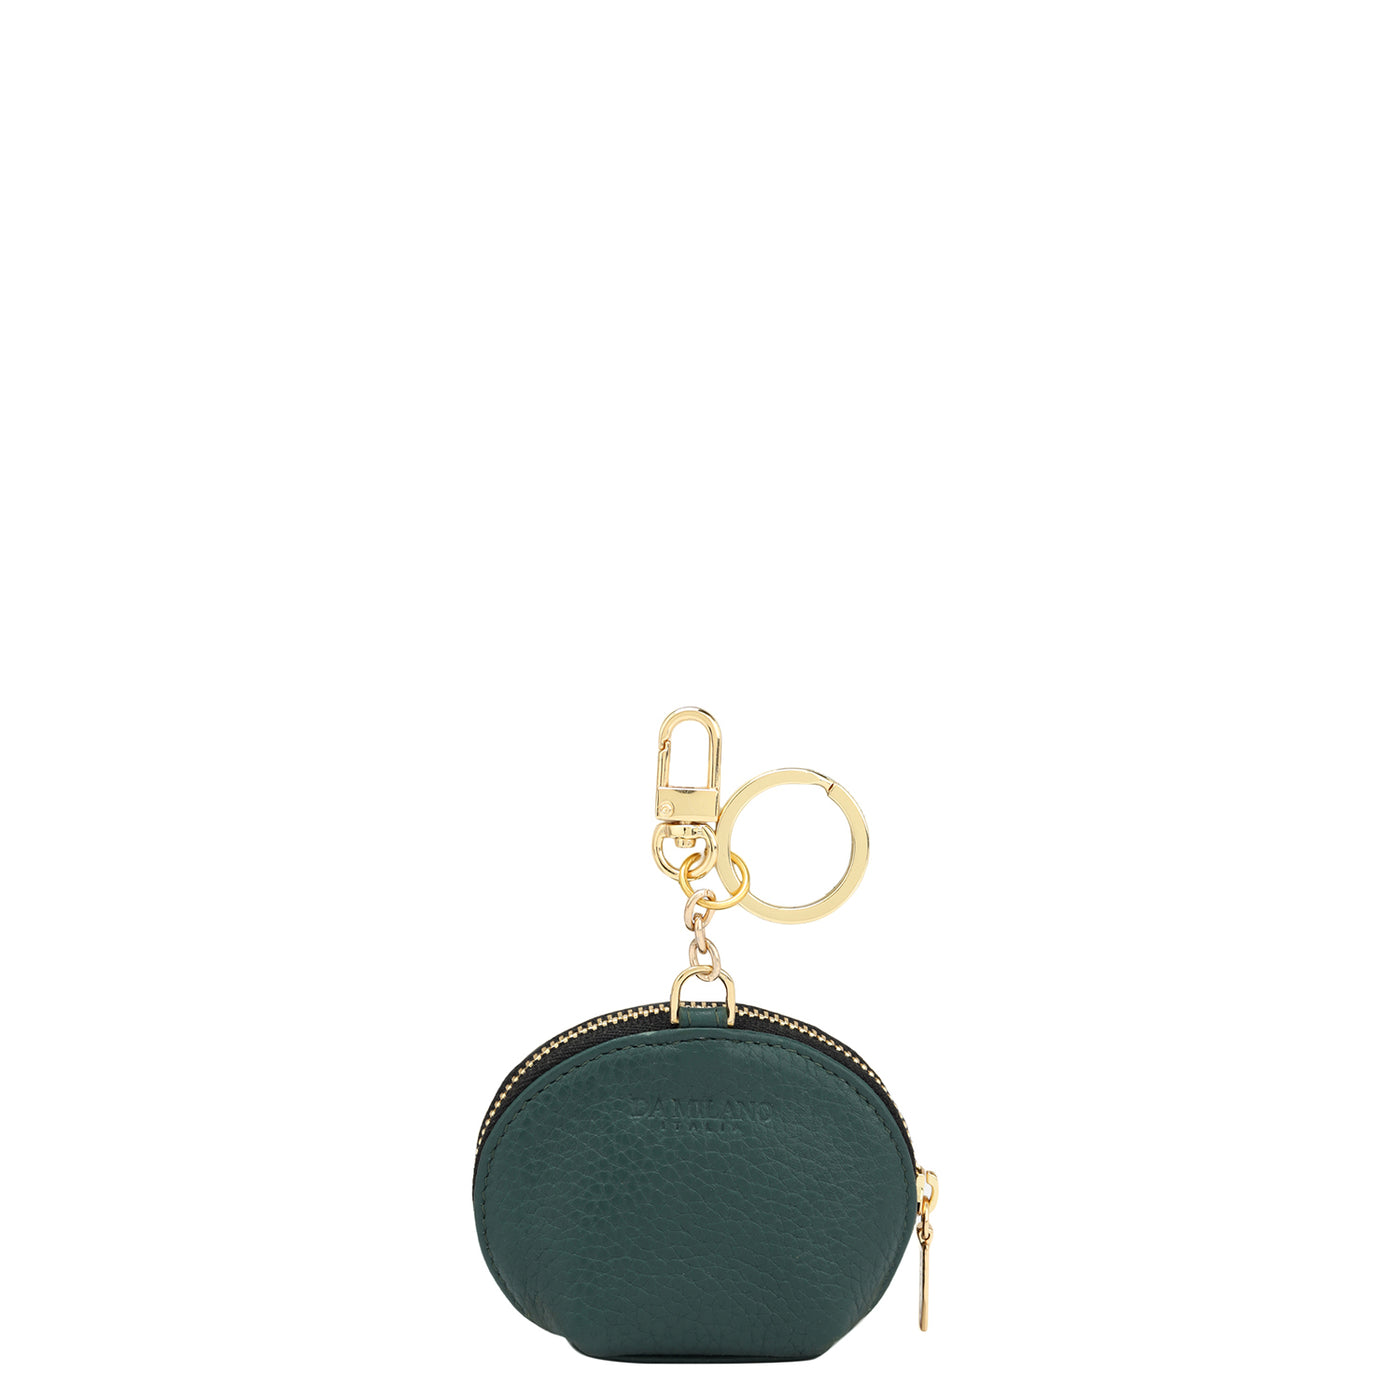 Wax Leather Bag Hanging - Teal